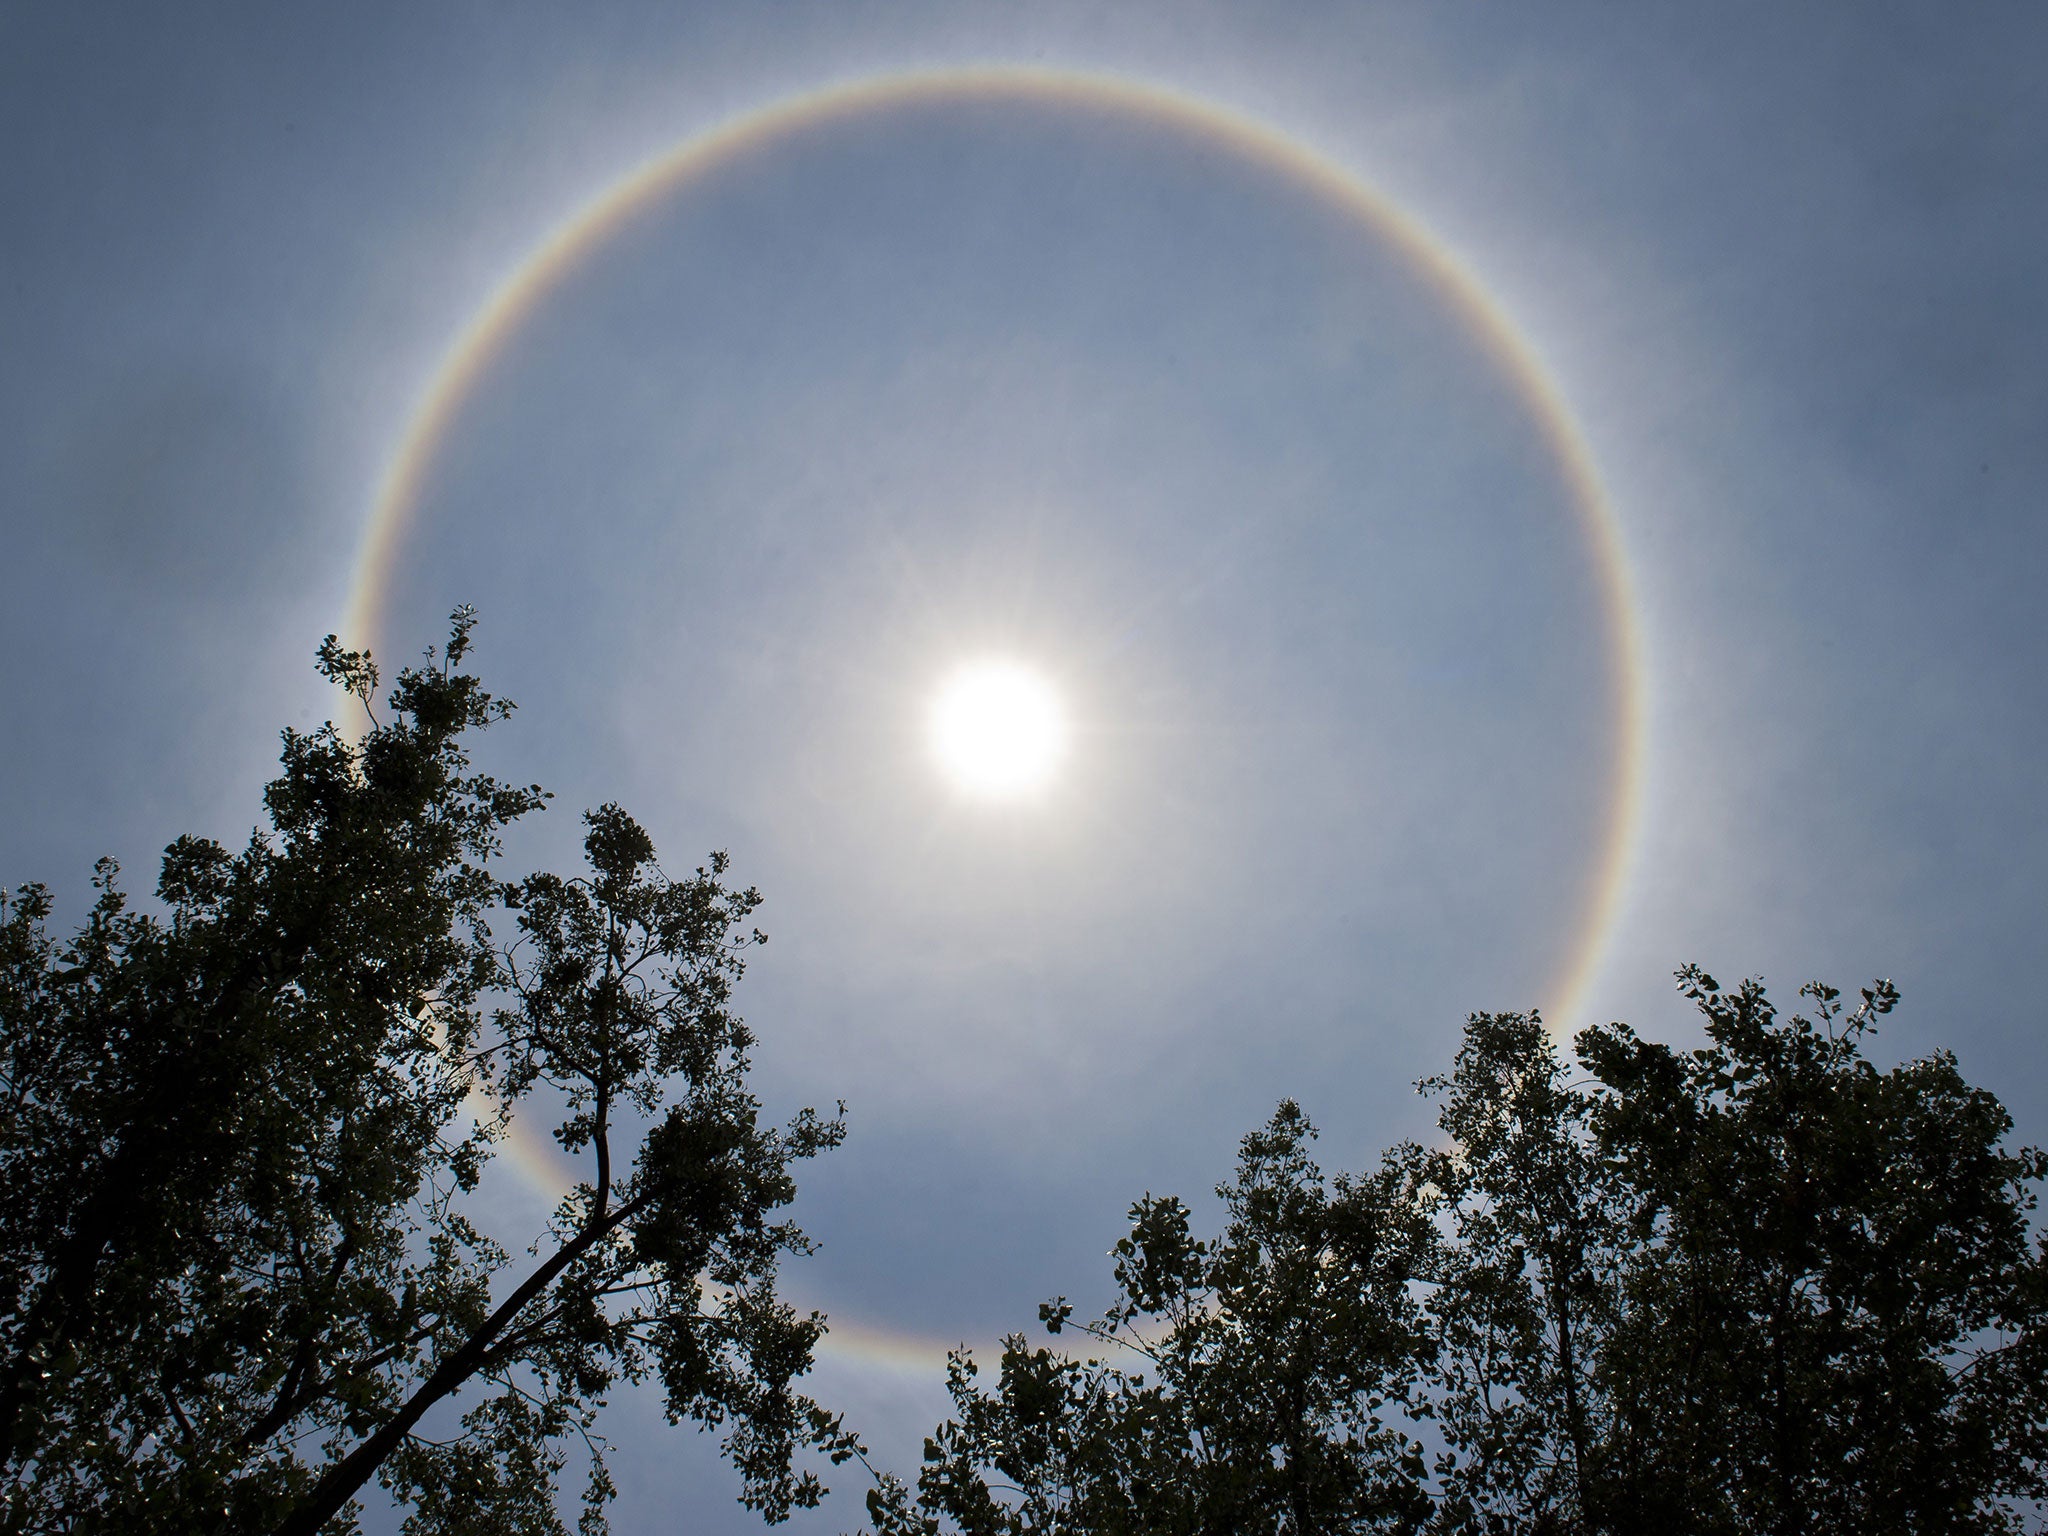 The halo effect: Ring around sun visible in La Crosse